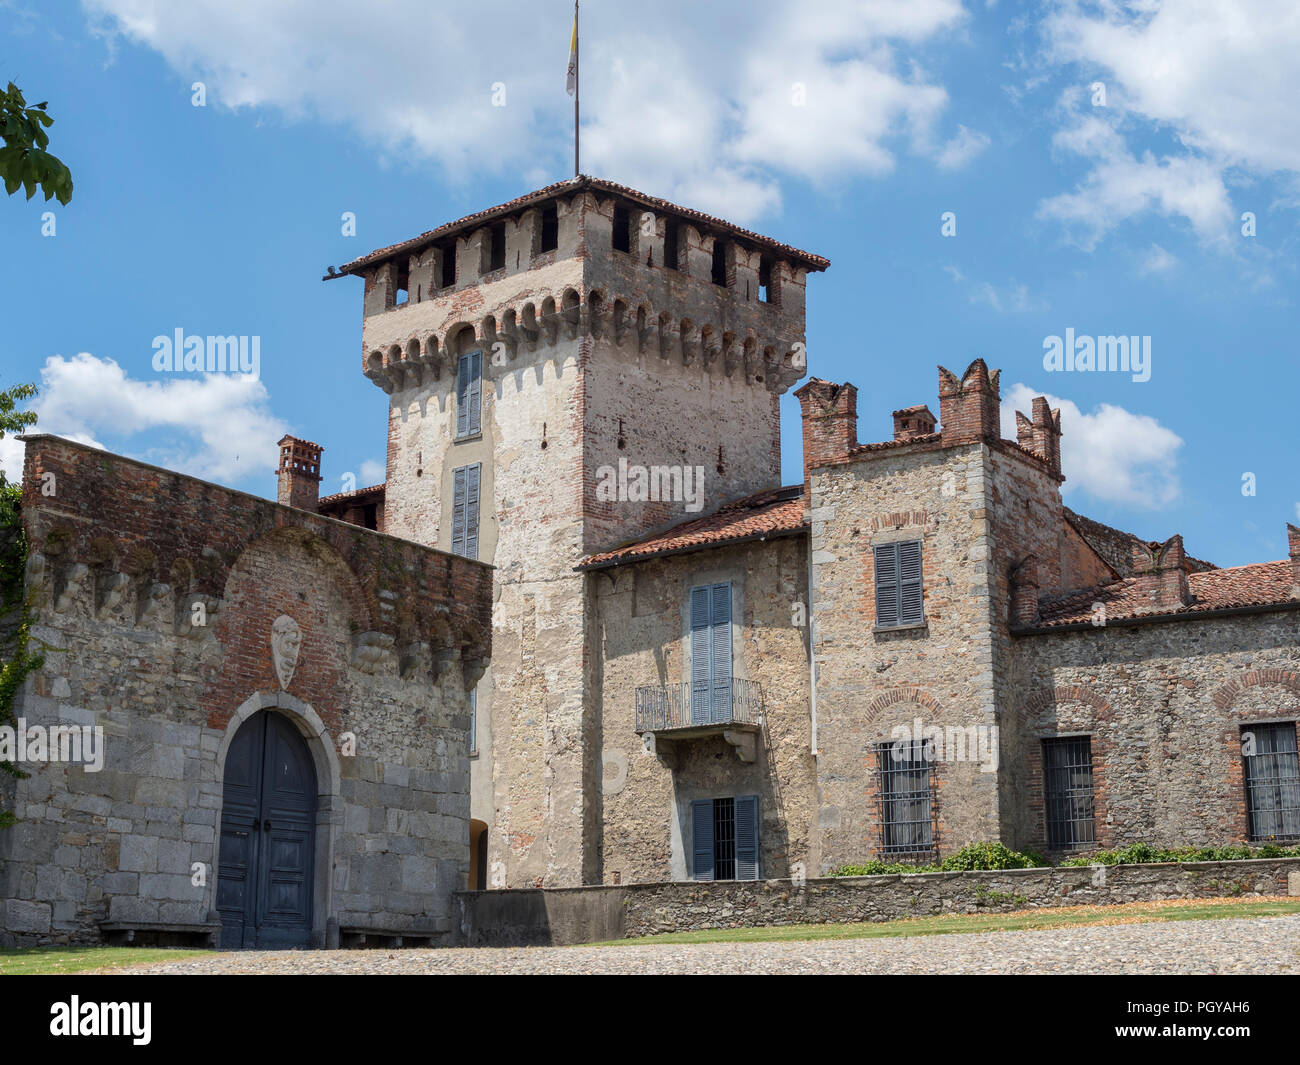 Somma Lombardo, Varese, Lombardy, Italy: exterior of the medieval castle  Stock Photo - Alamy